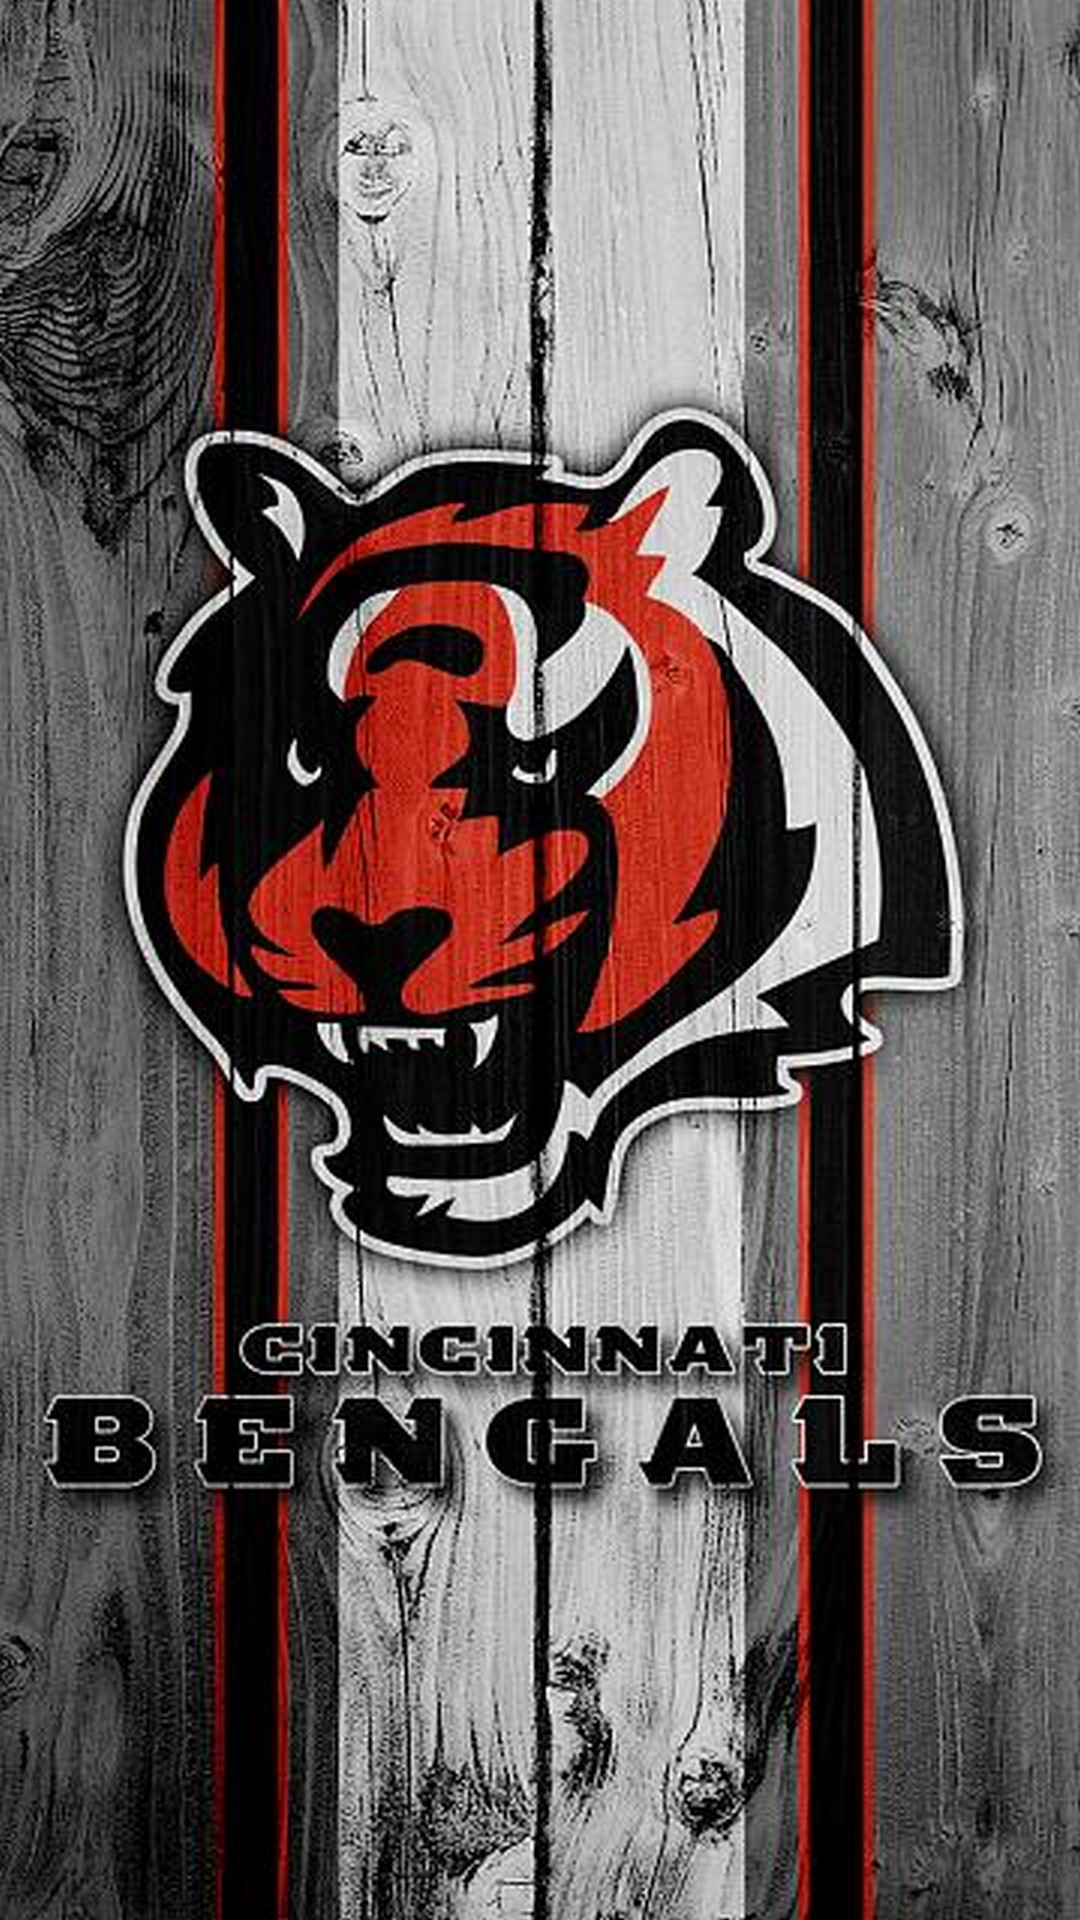 Cincinnati Bengals iPhone Wallpaper Lock Screen with high-resolution 1080x1920 pixel. Download and set as wallpaper for Apple iPhone X, XS Max, XR, 8, 7, 6, SE, iPad, Android